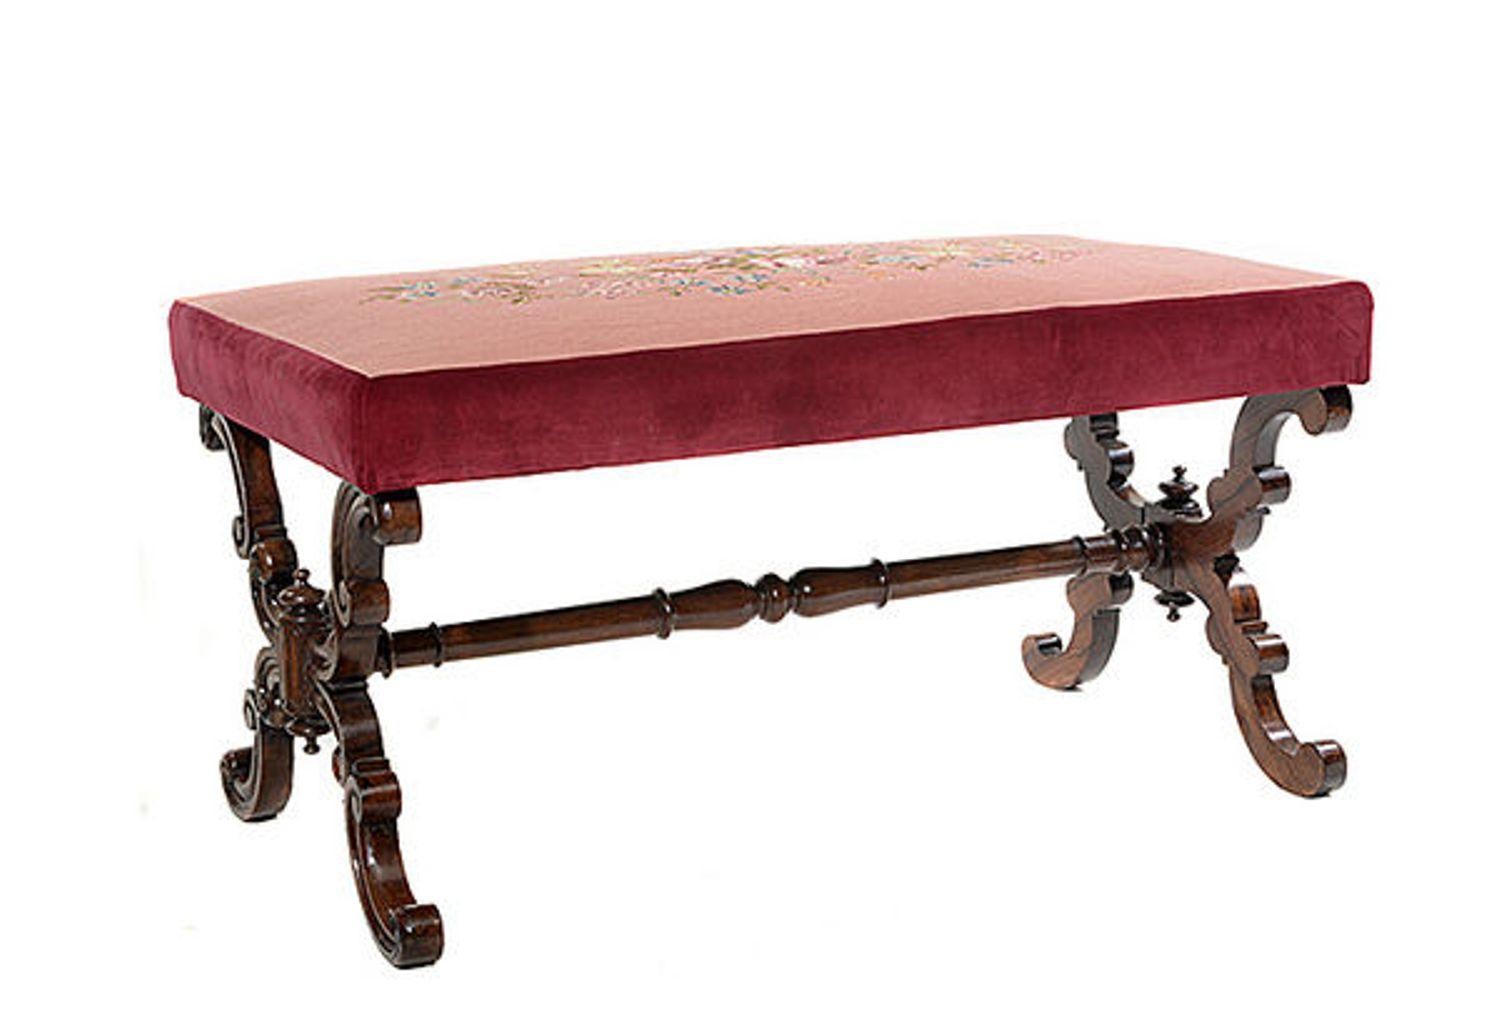 An early Victorian rosewood X framed stool covered with a hand worked floral tapestry  on a pink background and with a red velvet border.

The moulded and scrolling X frame side supports are united by a tapering ring turned central stretcher.